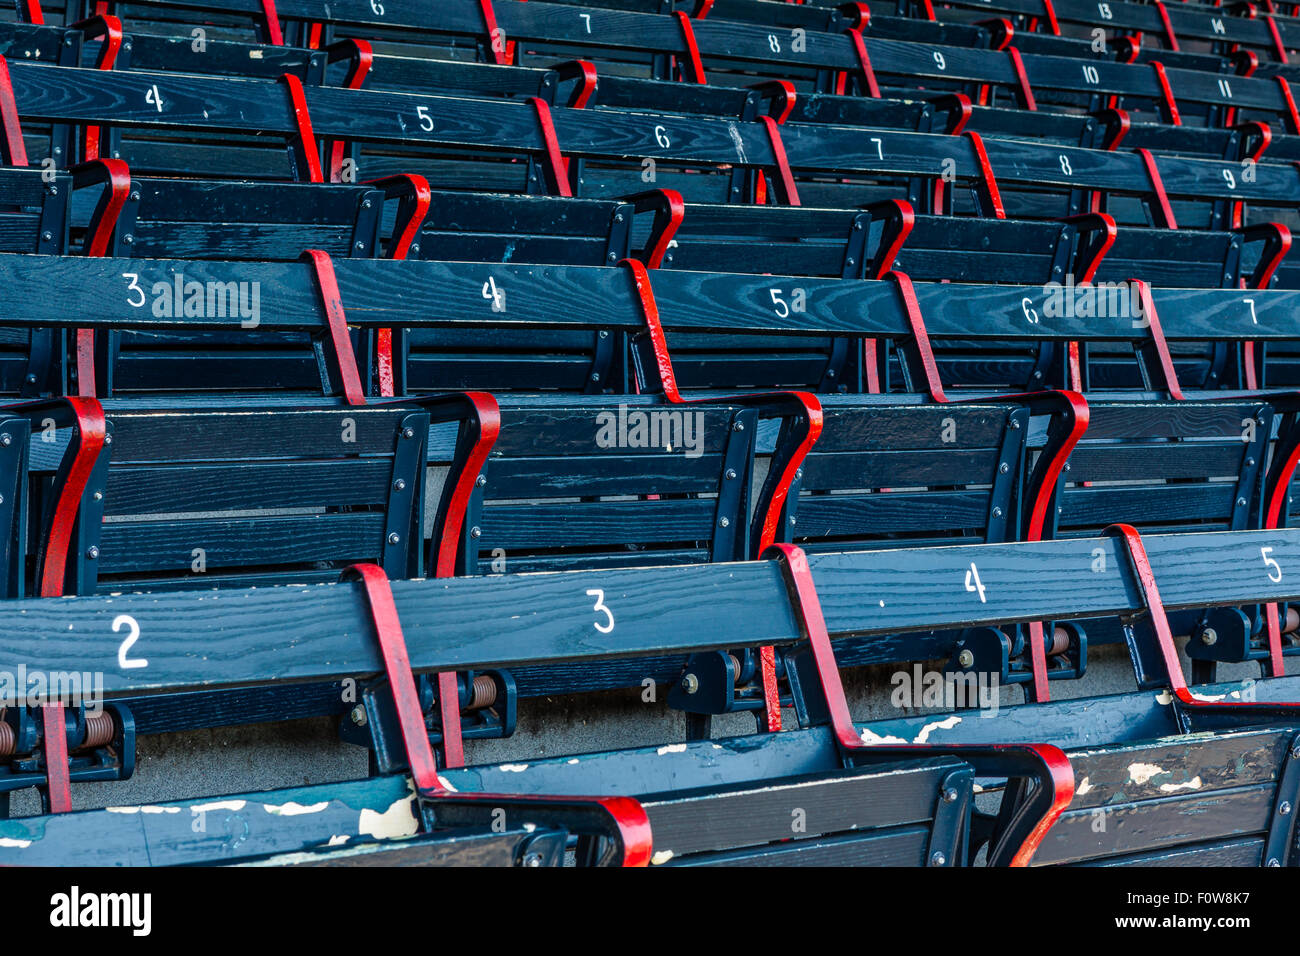 Home of the Boston Red Sox Fenway Park located in Kenmore Square in Boston, Massachusetts. Stock Photo